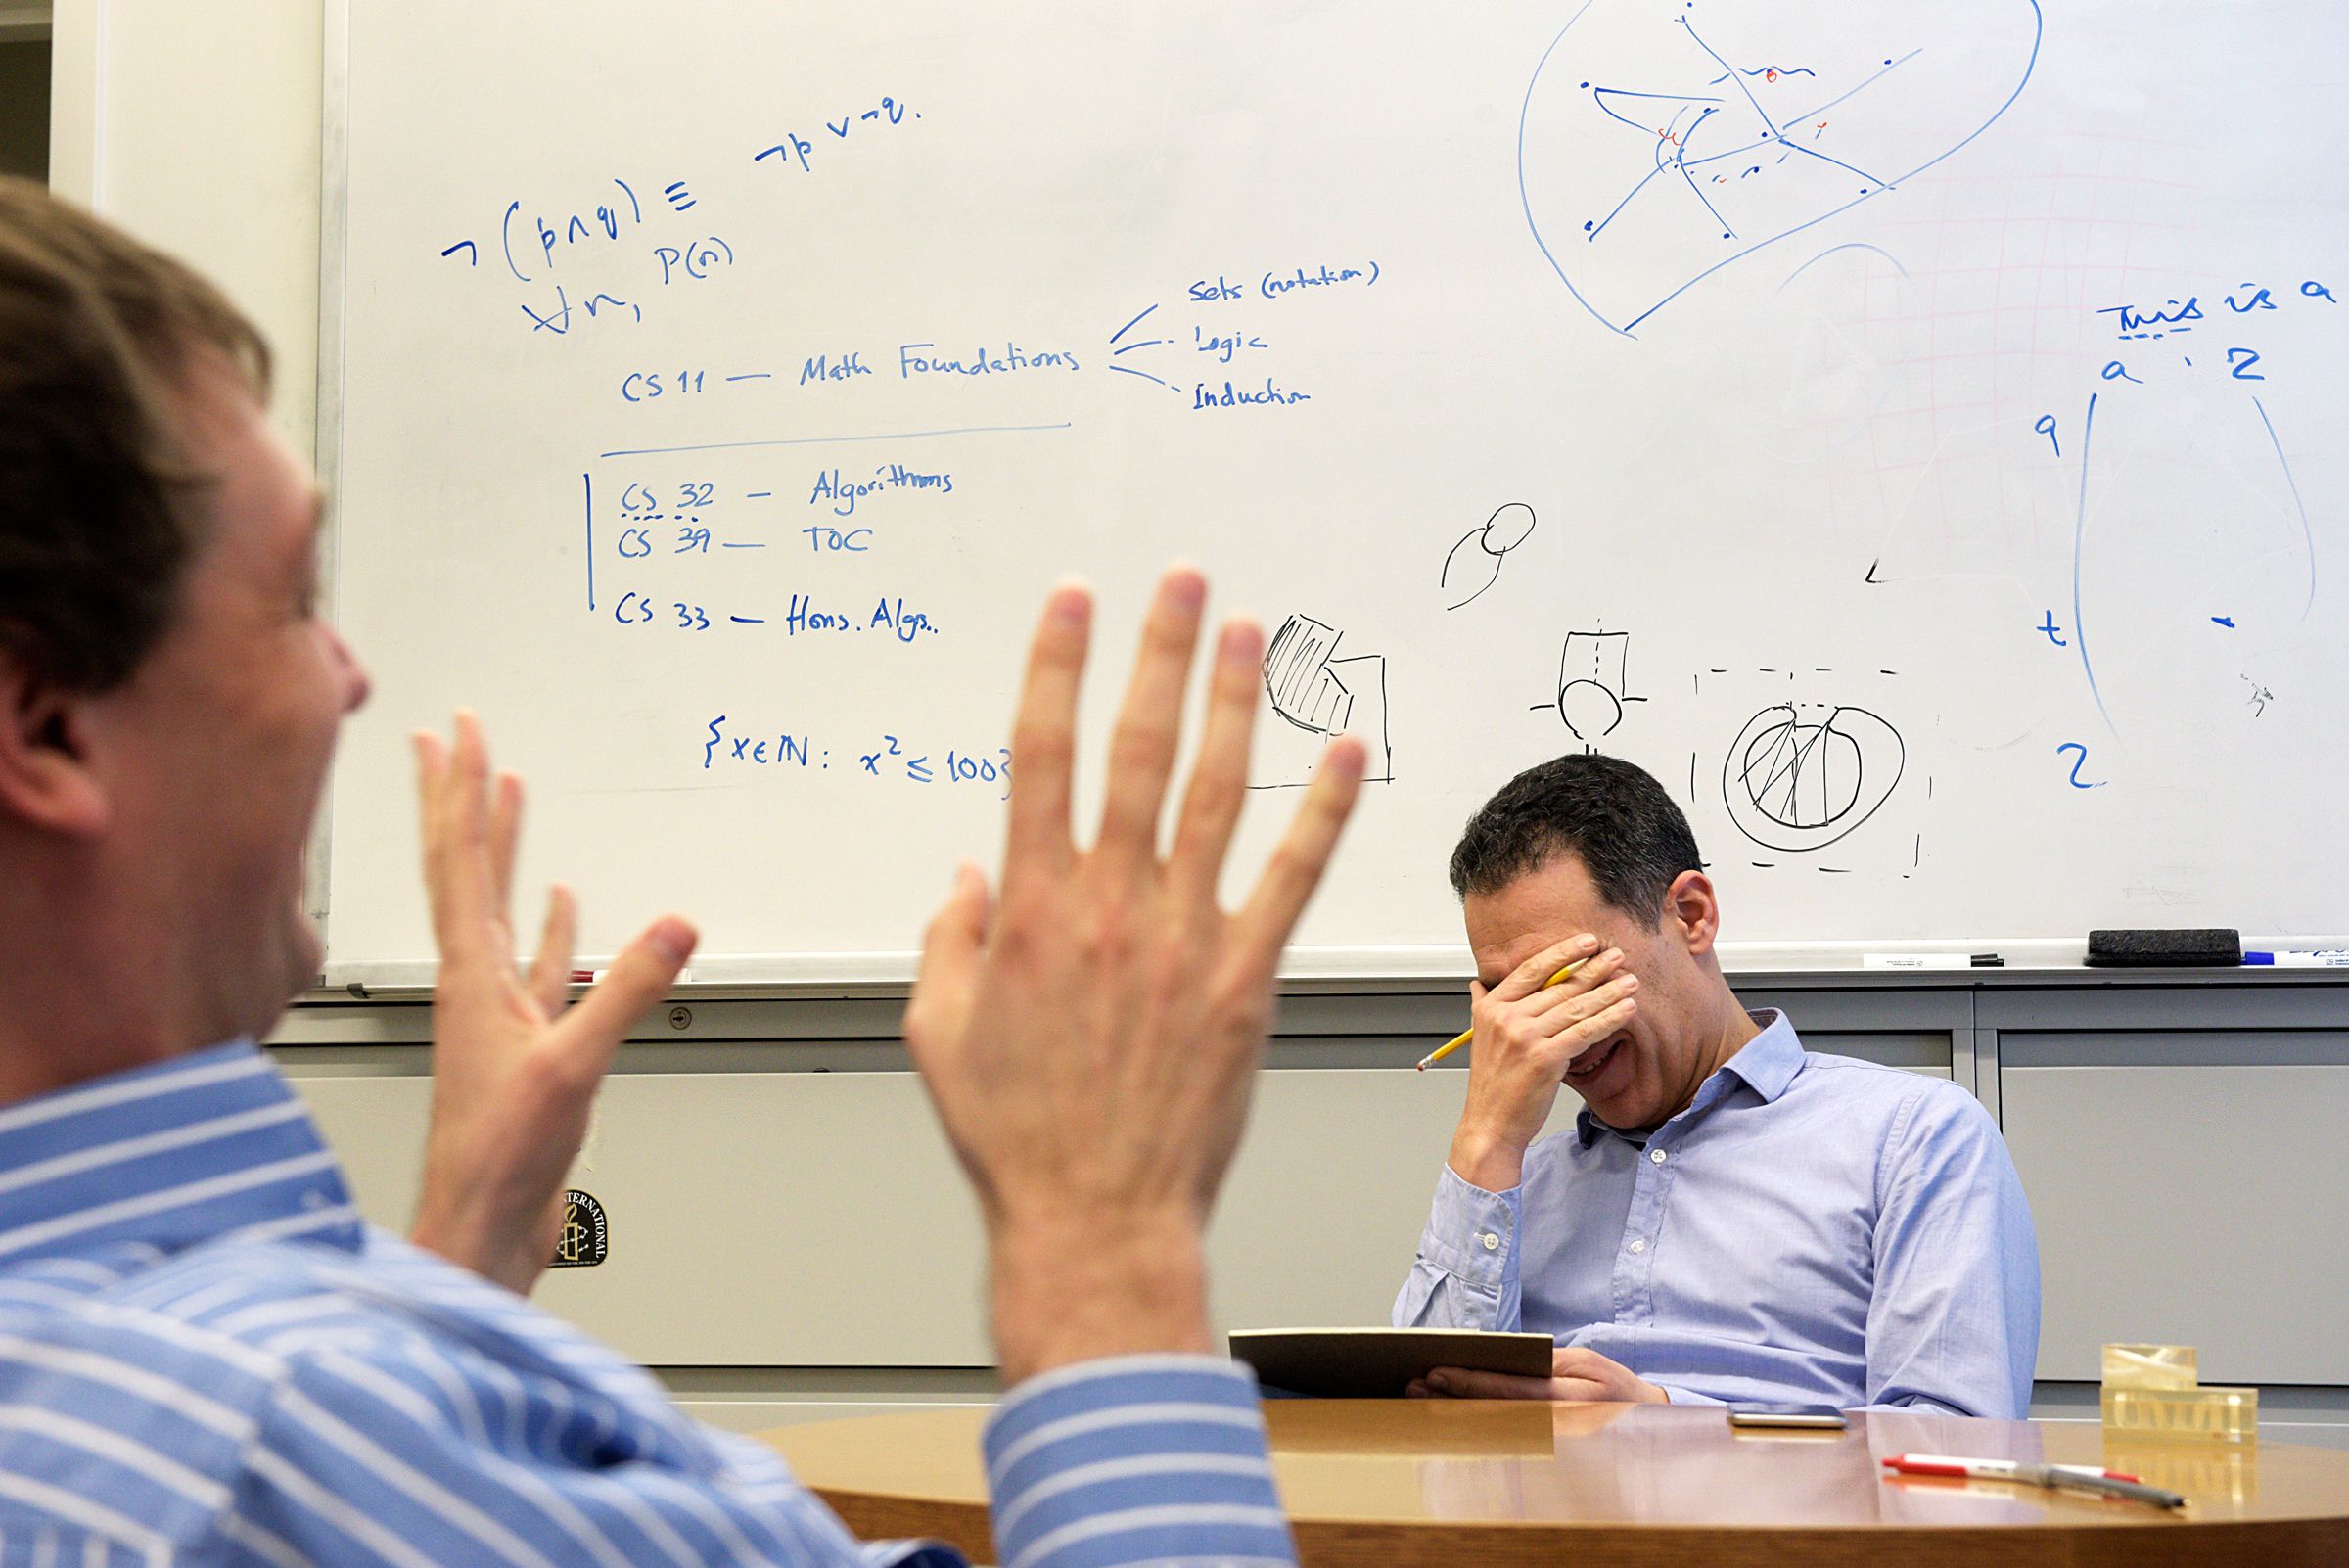 Hany Farid, of Norwich, laughs with associate professor of computer science Devin Balkcom while planning a course for Tuck business school students in Hanover, N.H., Wednesday, February 15, 2017. (Valley News - James M. Patterson) Copyright Valley News. May not be reprinted or used online without permission. Send requests to permission@vnews.com.